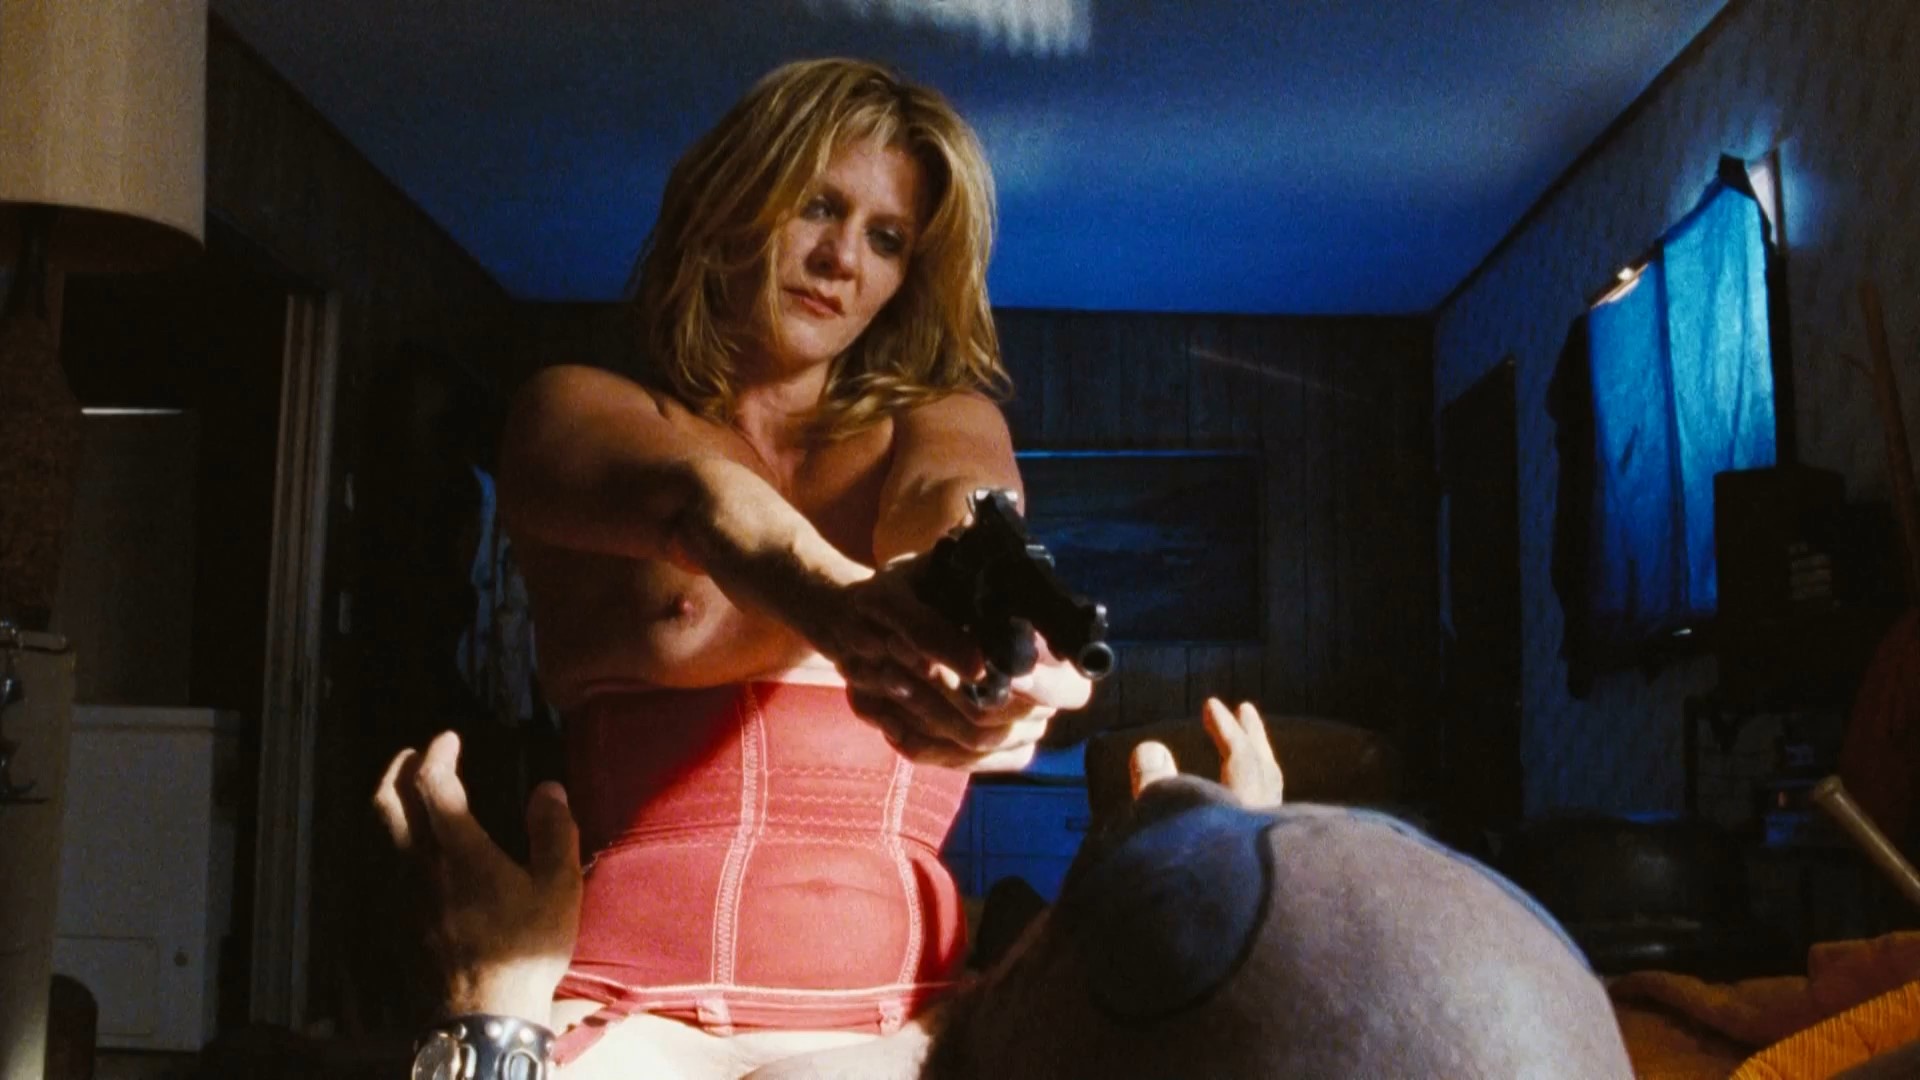 The Devil’s Rejects Nude Scenes. 